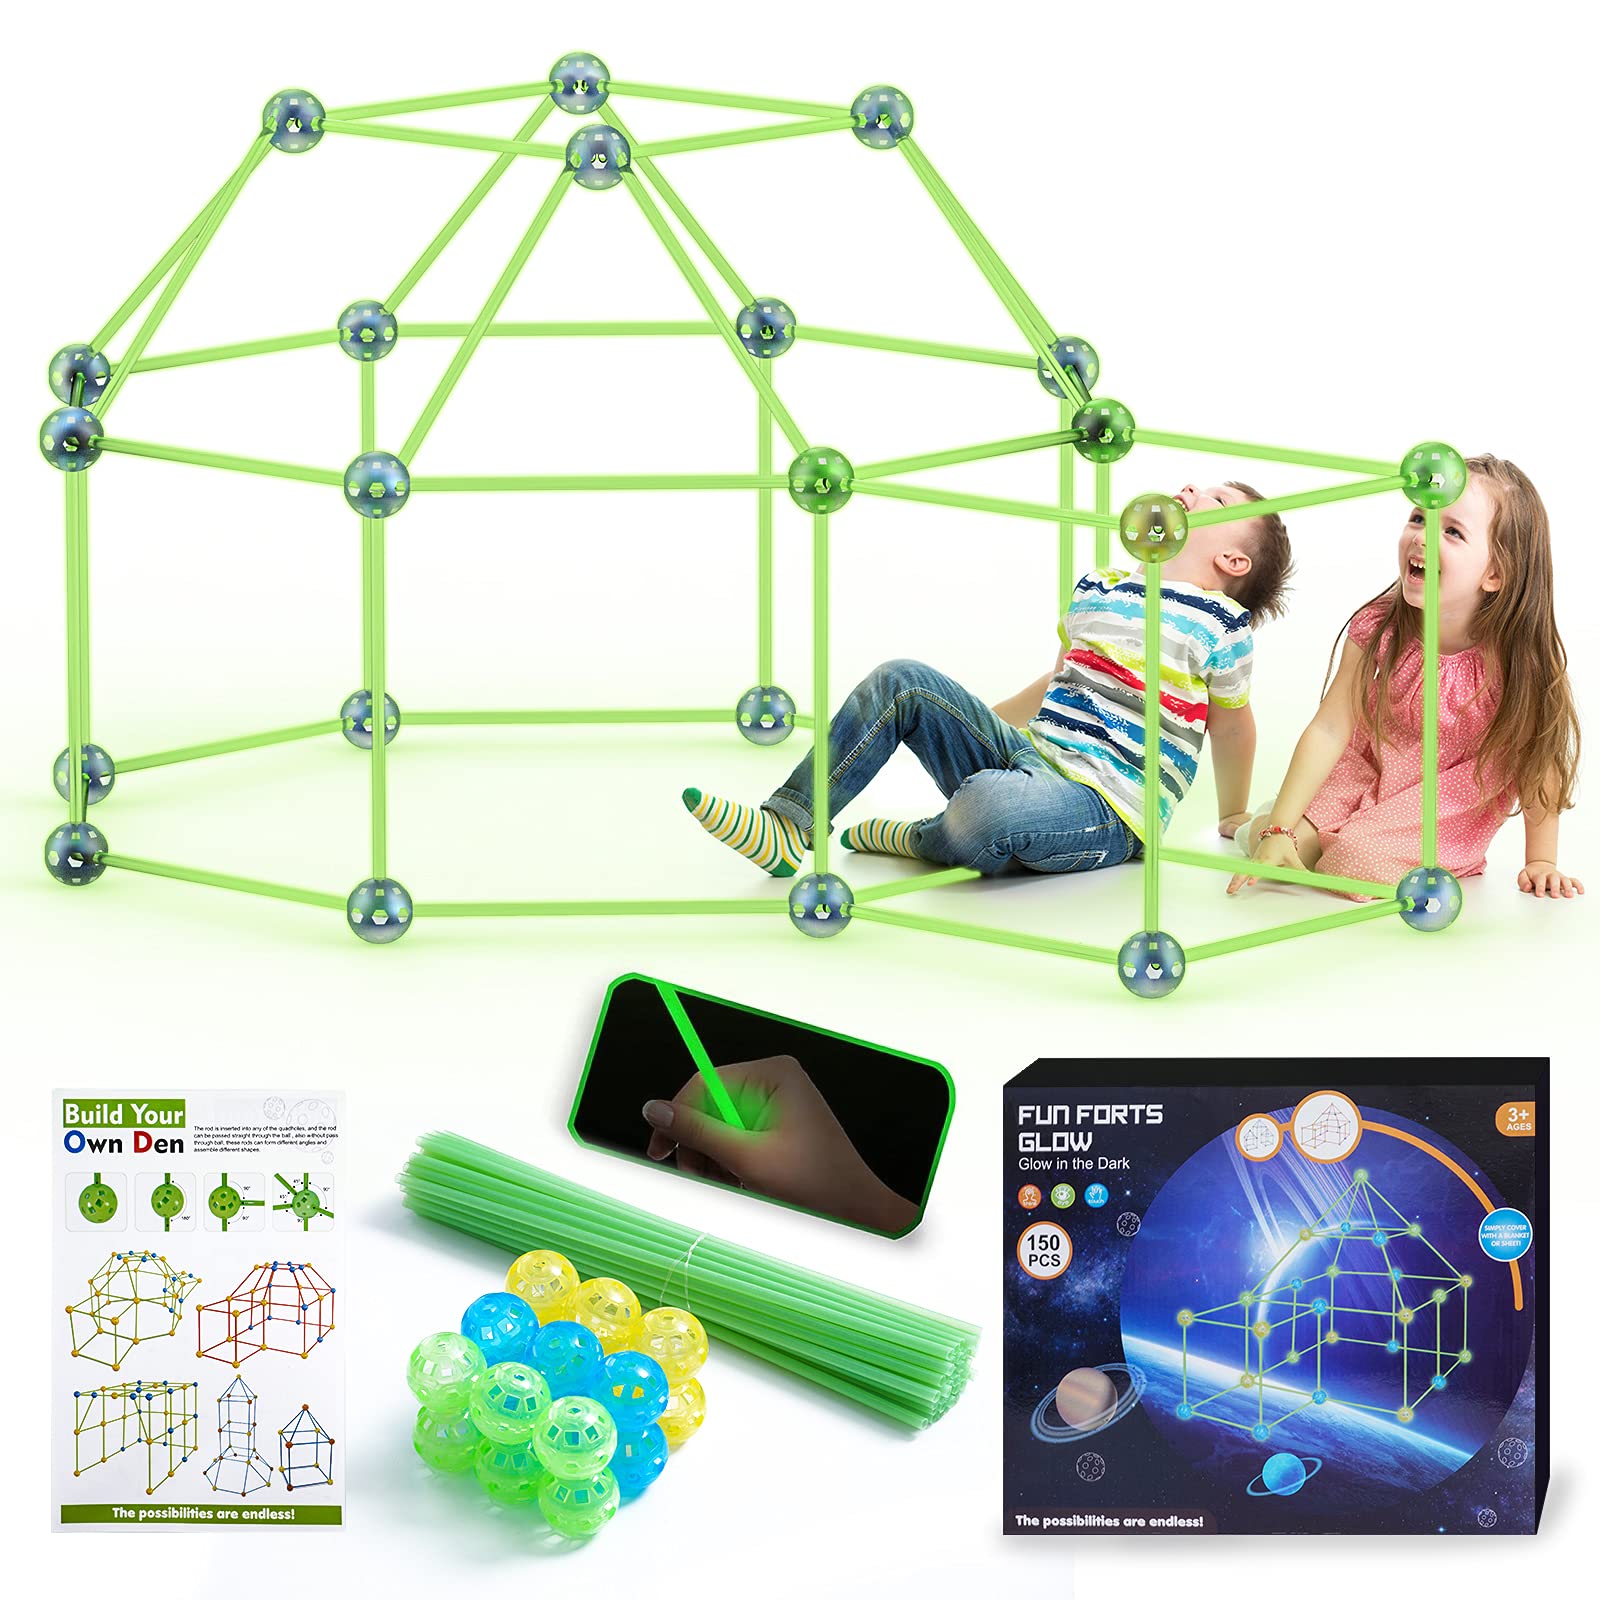 150 Pcs Glow Fort Building Kits for Kids, Creative Toys Forts for 3-14 Years Old Tent Construction Forts, Ultimate Forts Builder DIY Building Tent Learning Toy for Indoor & Outdoor Teepee Kit